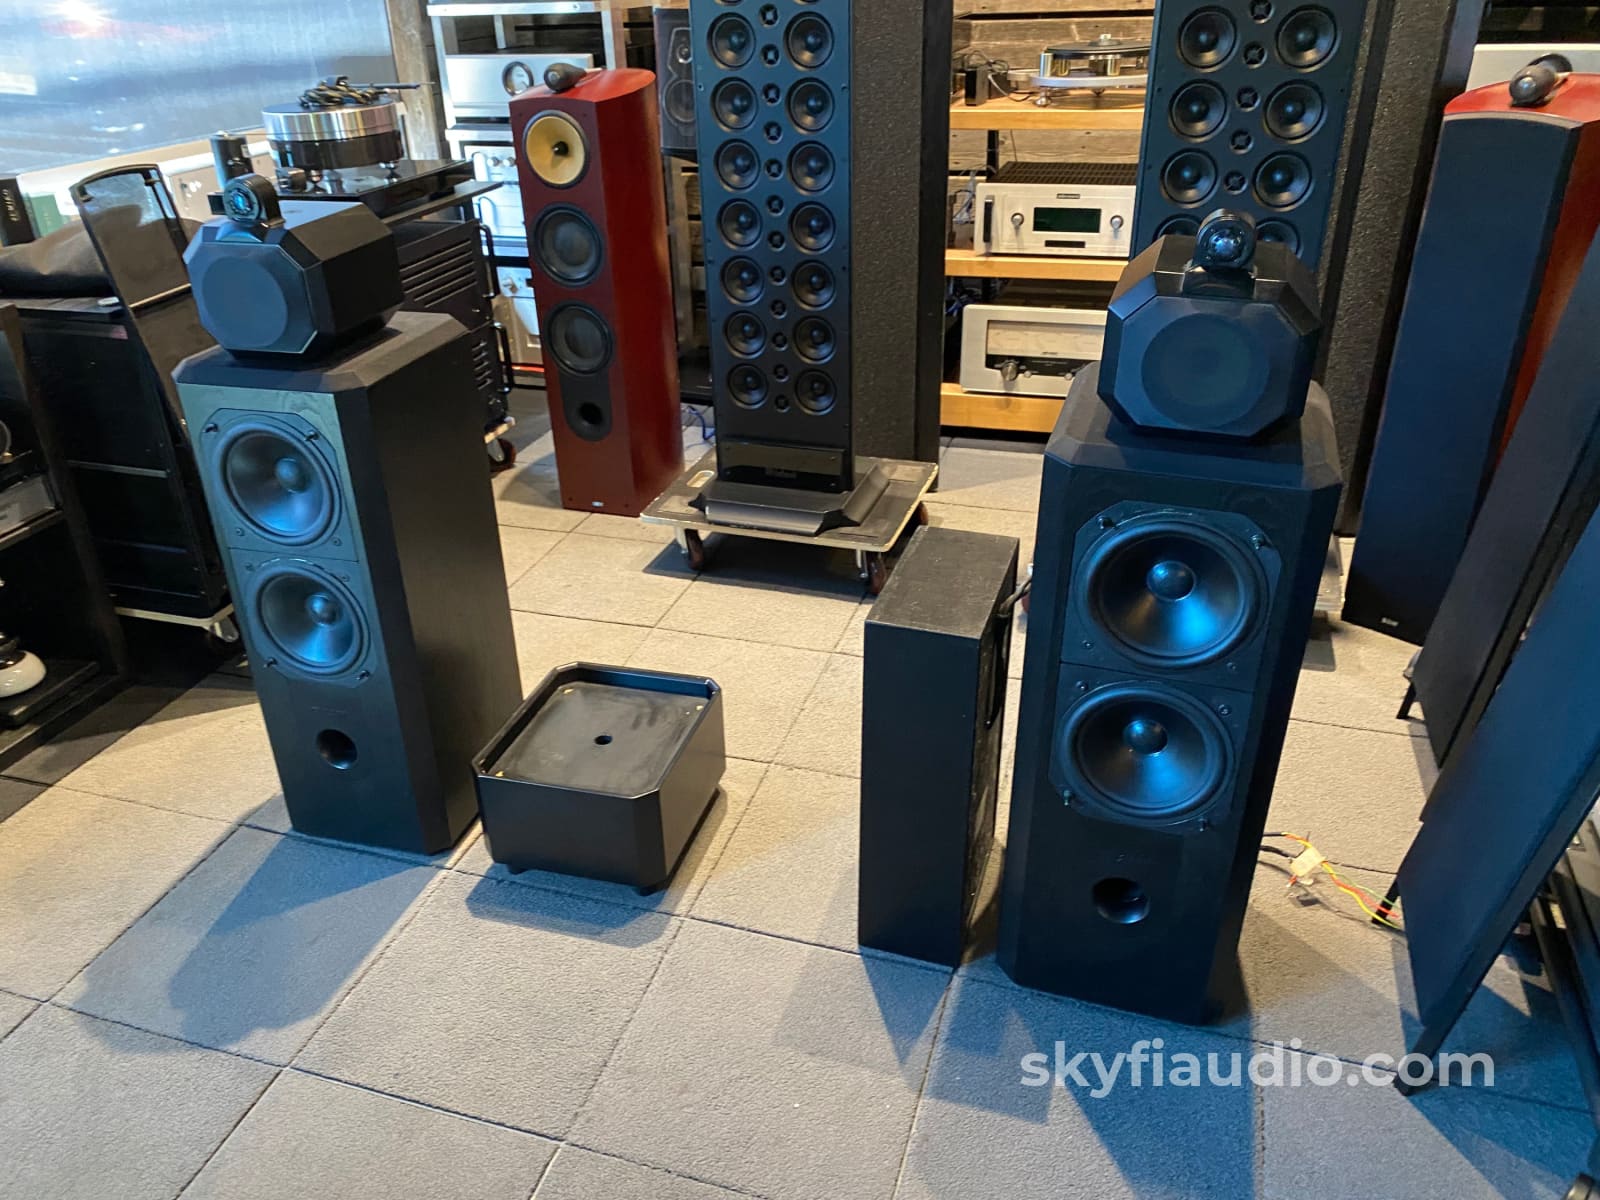 Bowers & Wilkins Matrix 802 Series 2 Speakers - W/External Crossovers Stands And Boxes